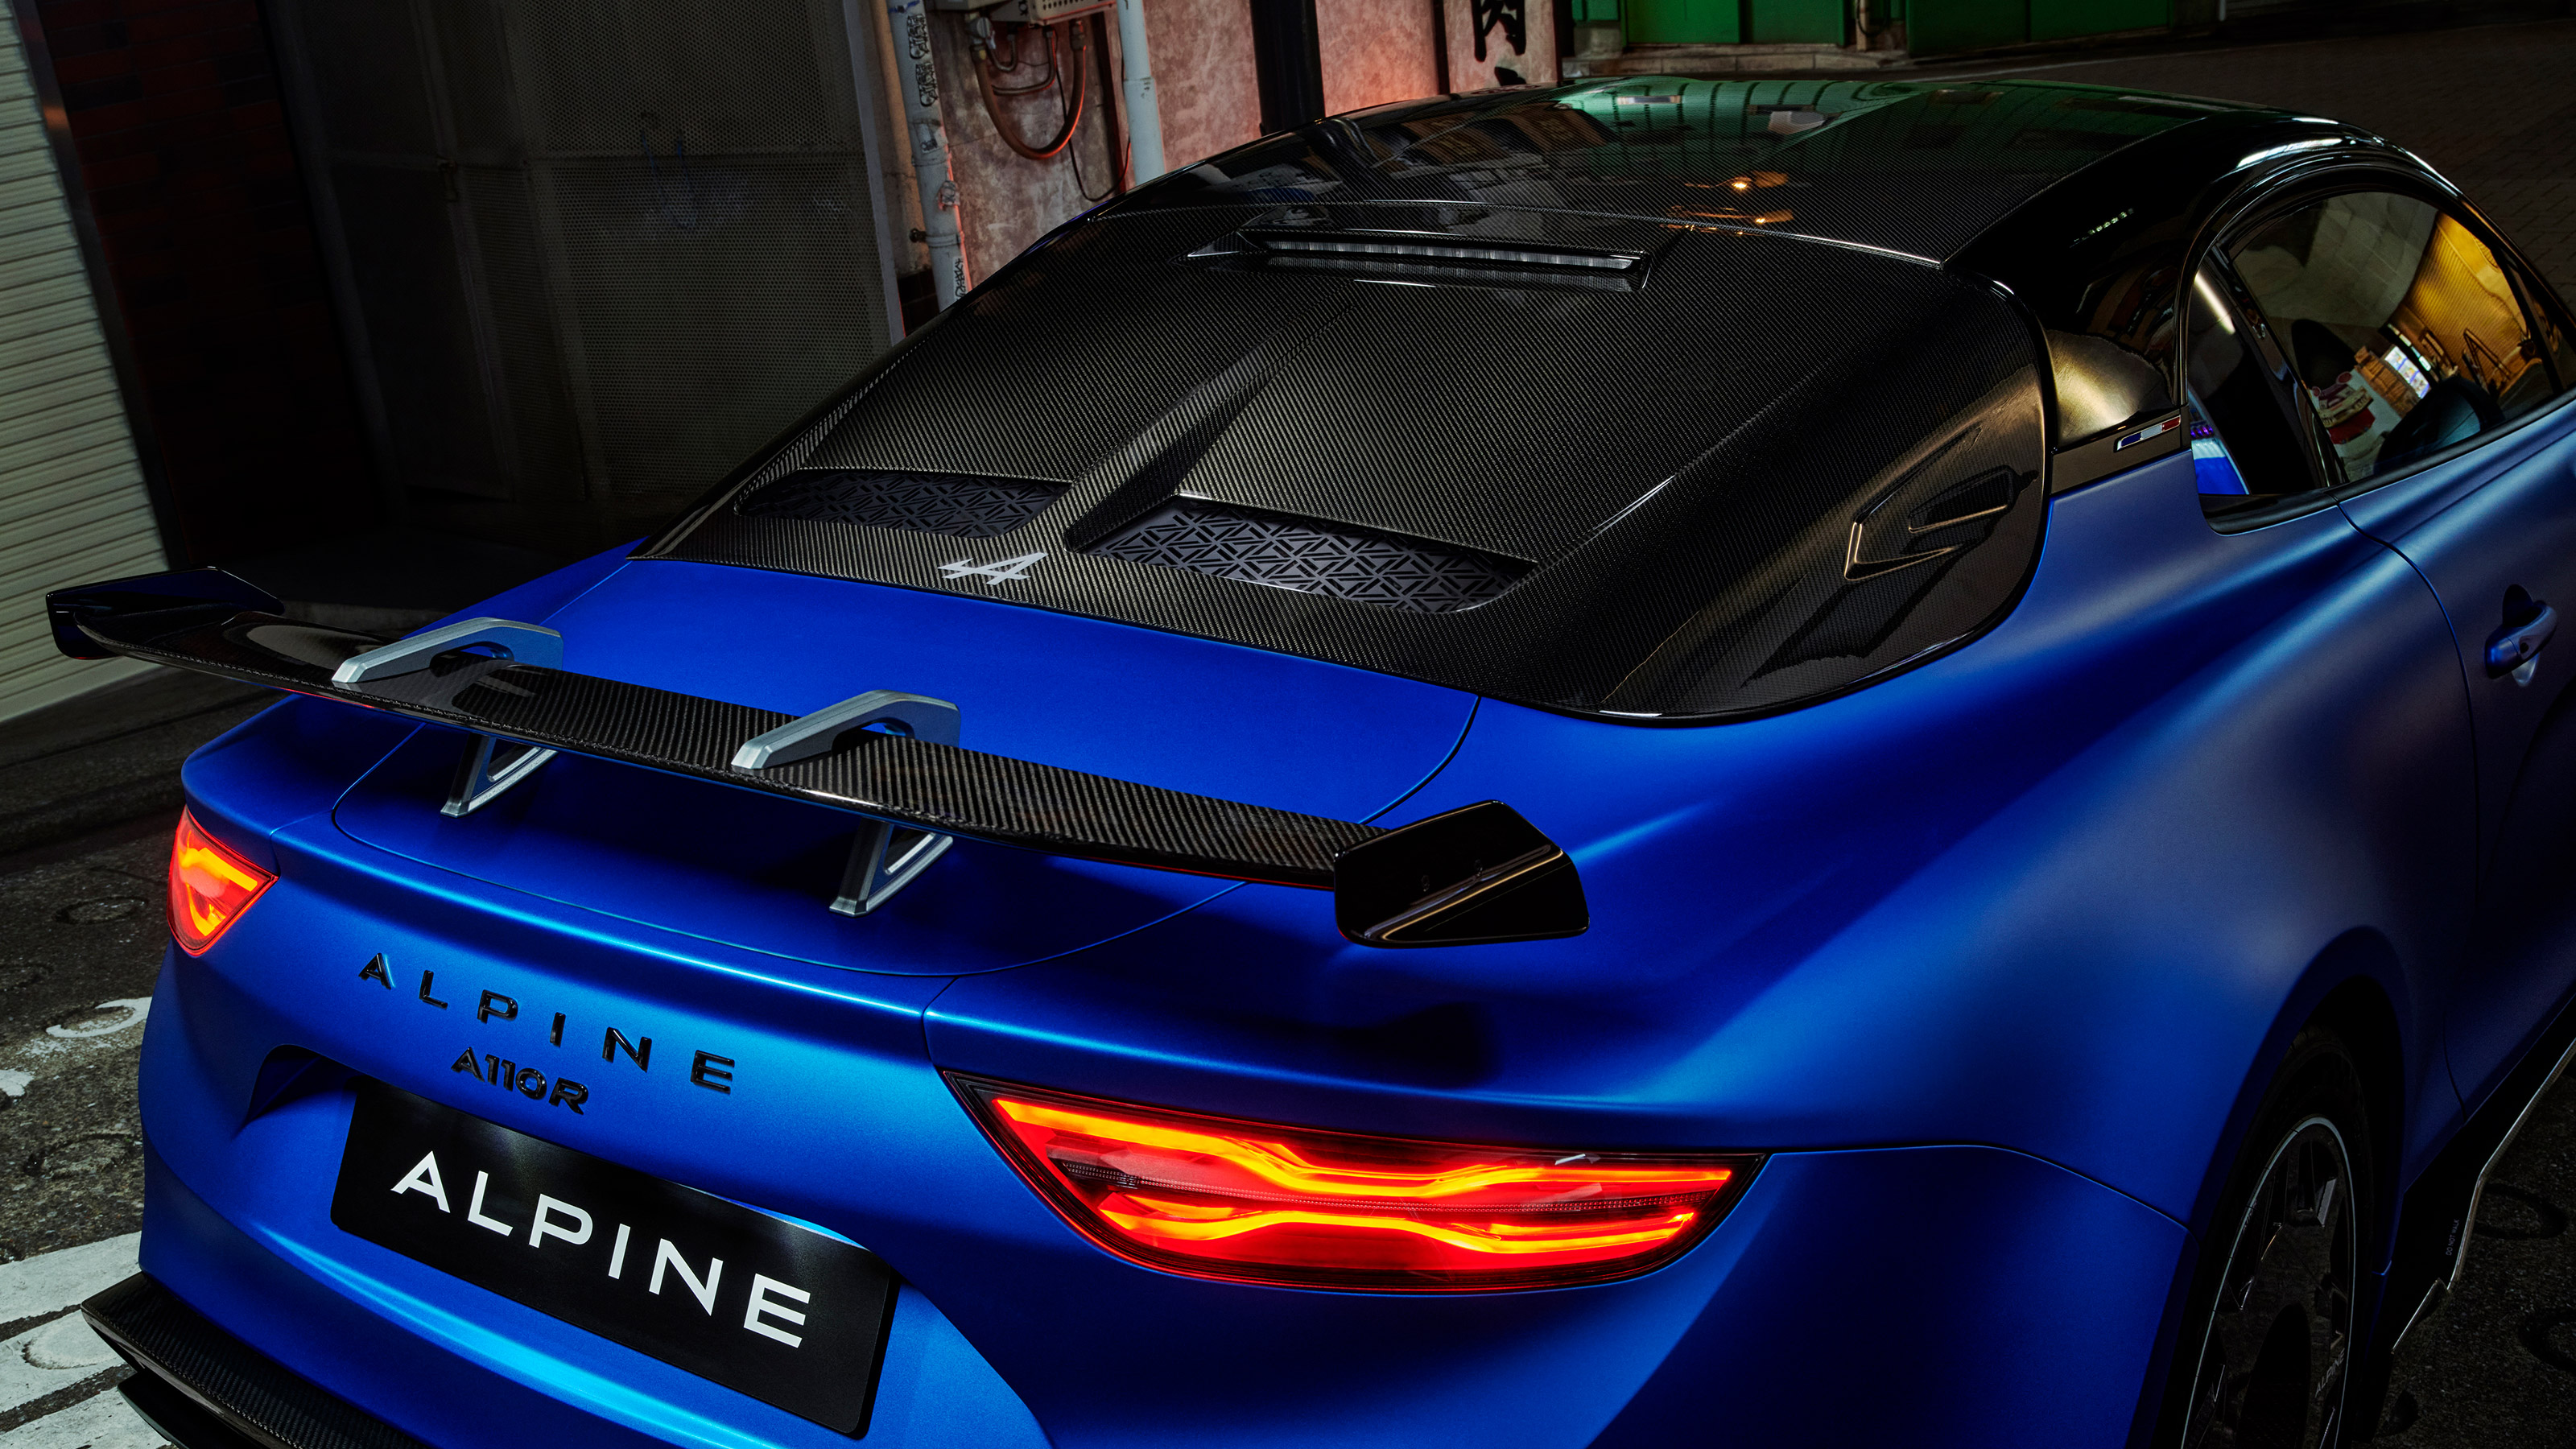 Alpine A110 R Fernando Alonso Debuts With €148,000 Price Tag